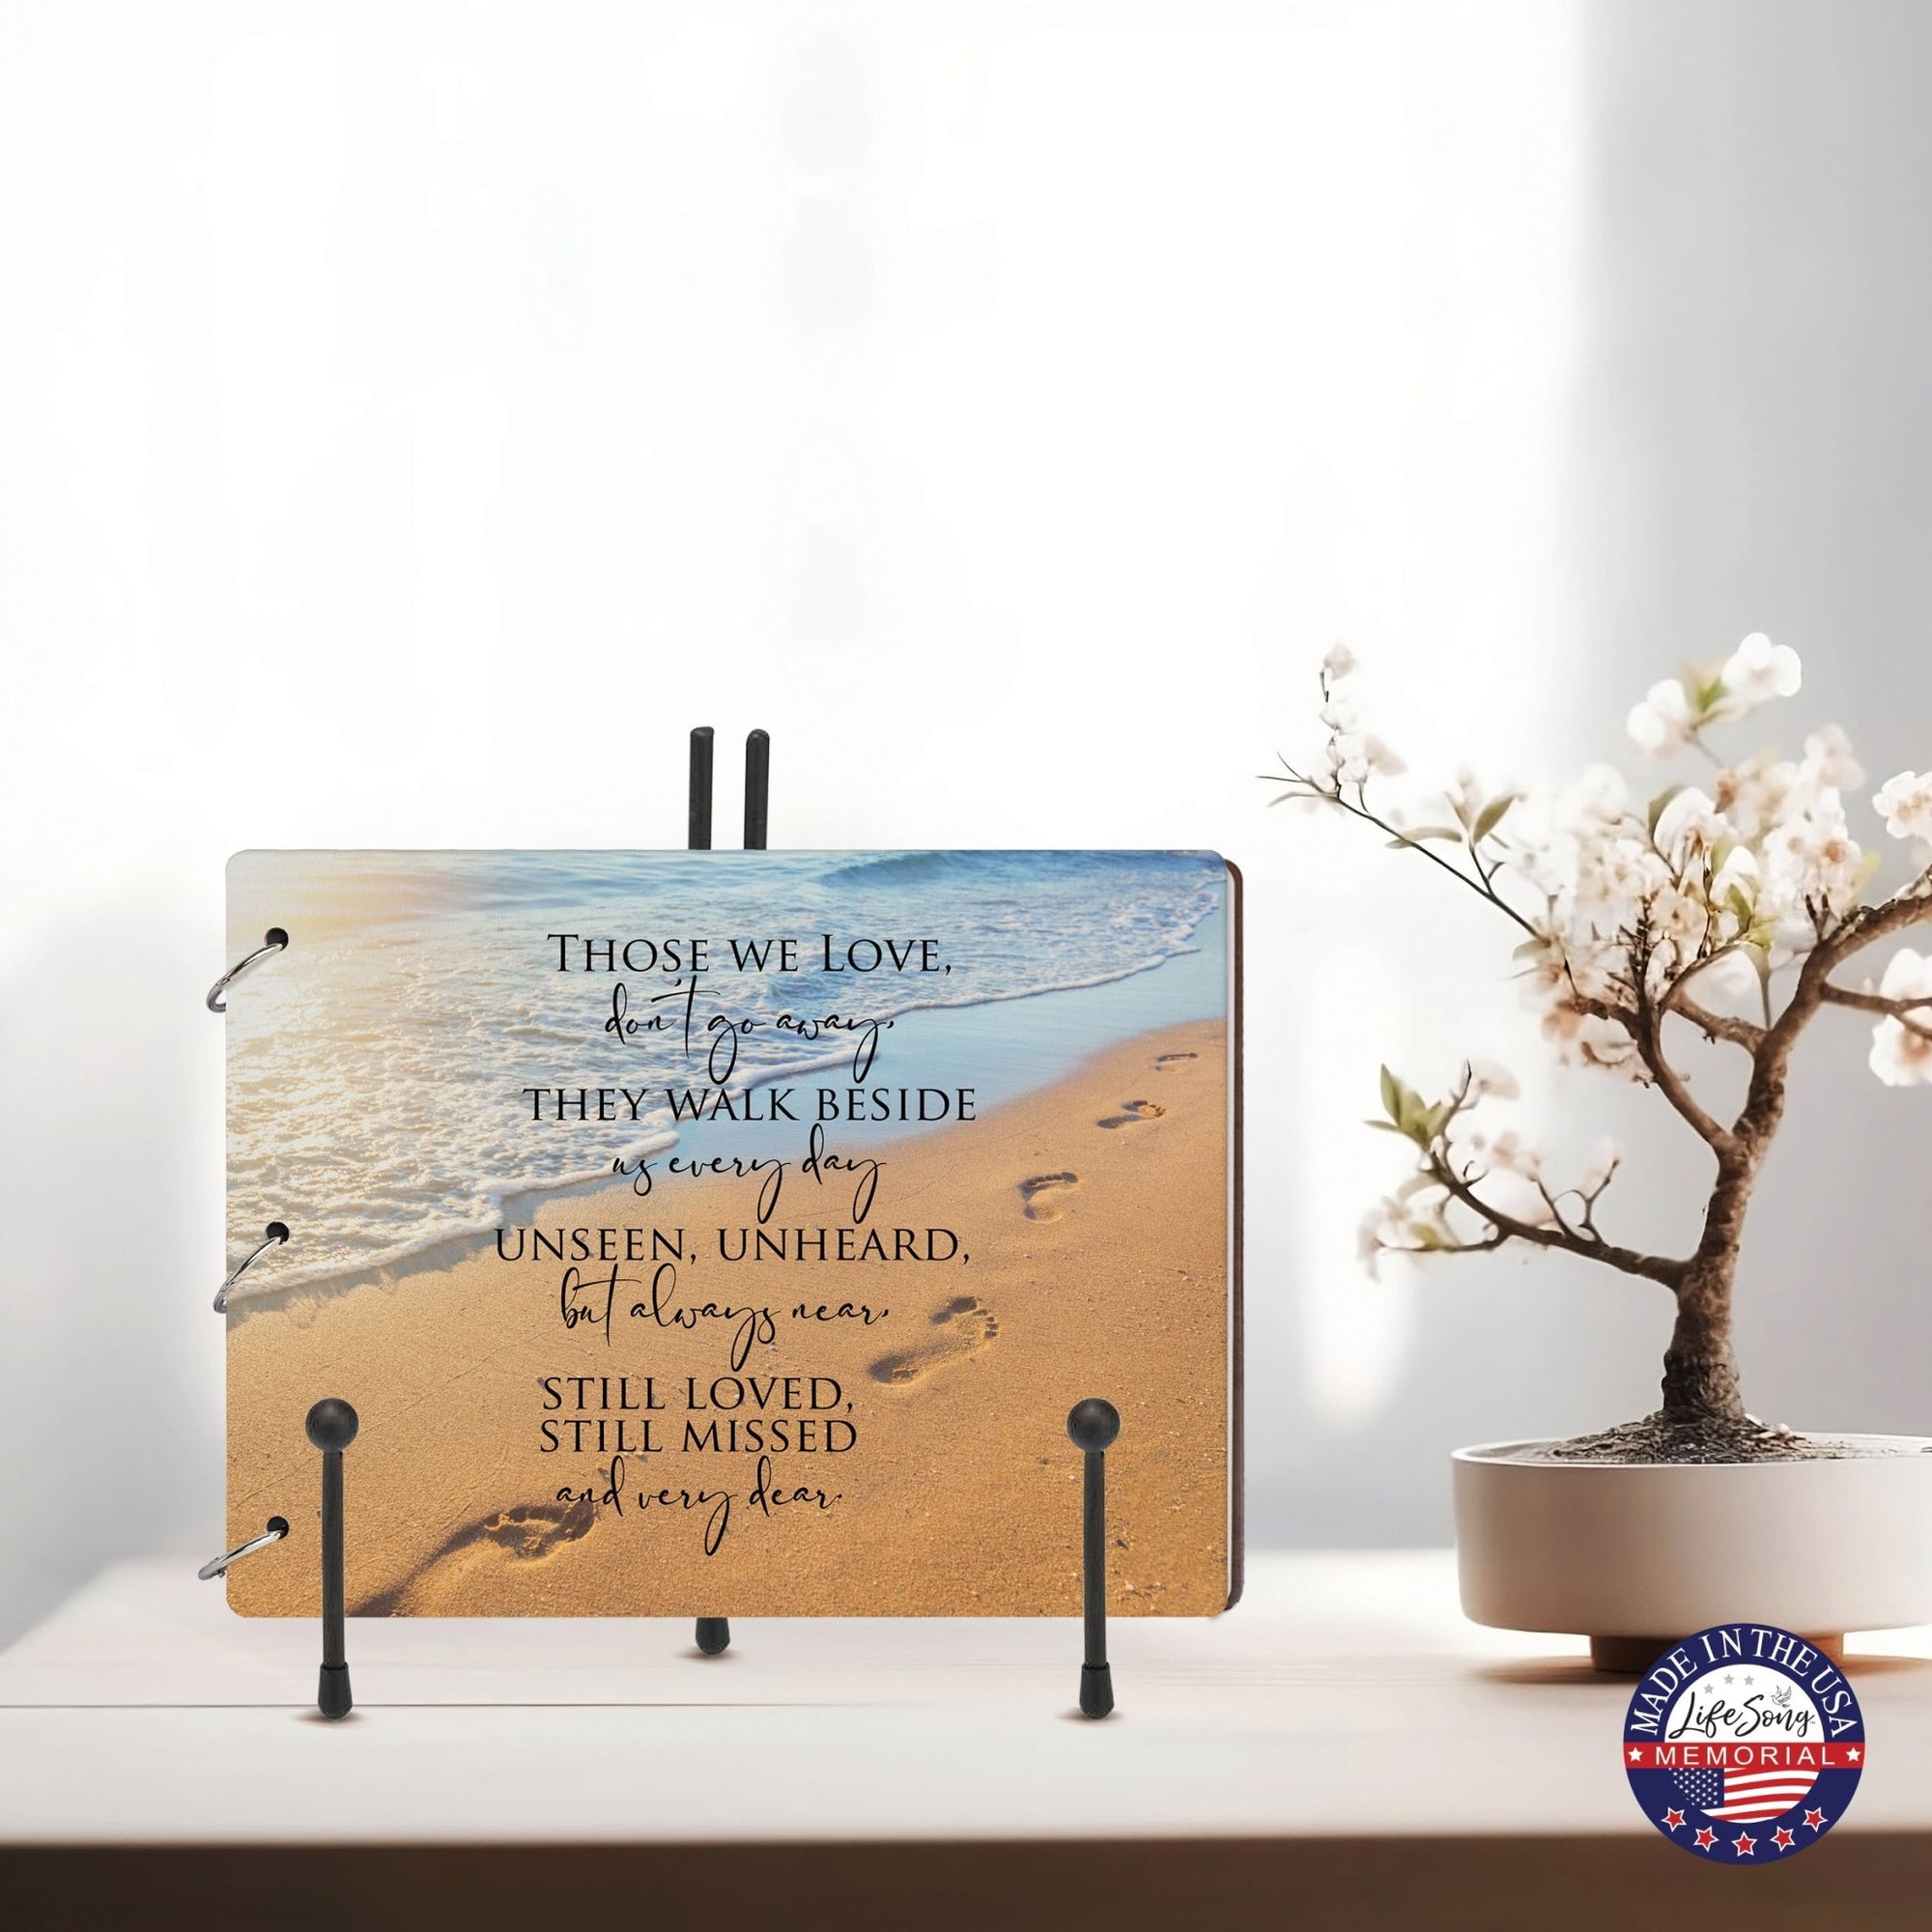 Celebration Of Life Funeral Guest Books For Memorial Services Registry With Wooden Cover - Those We Love - LifeSong Milestones